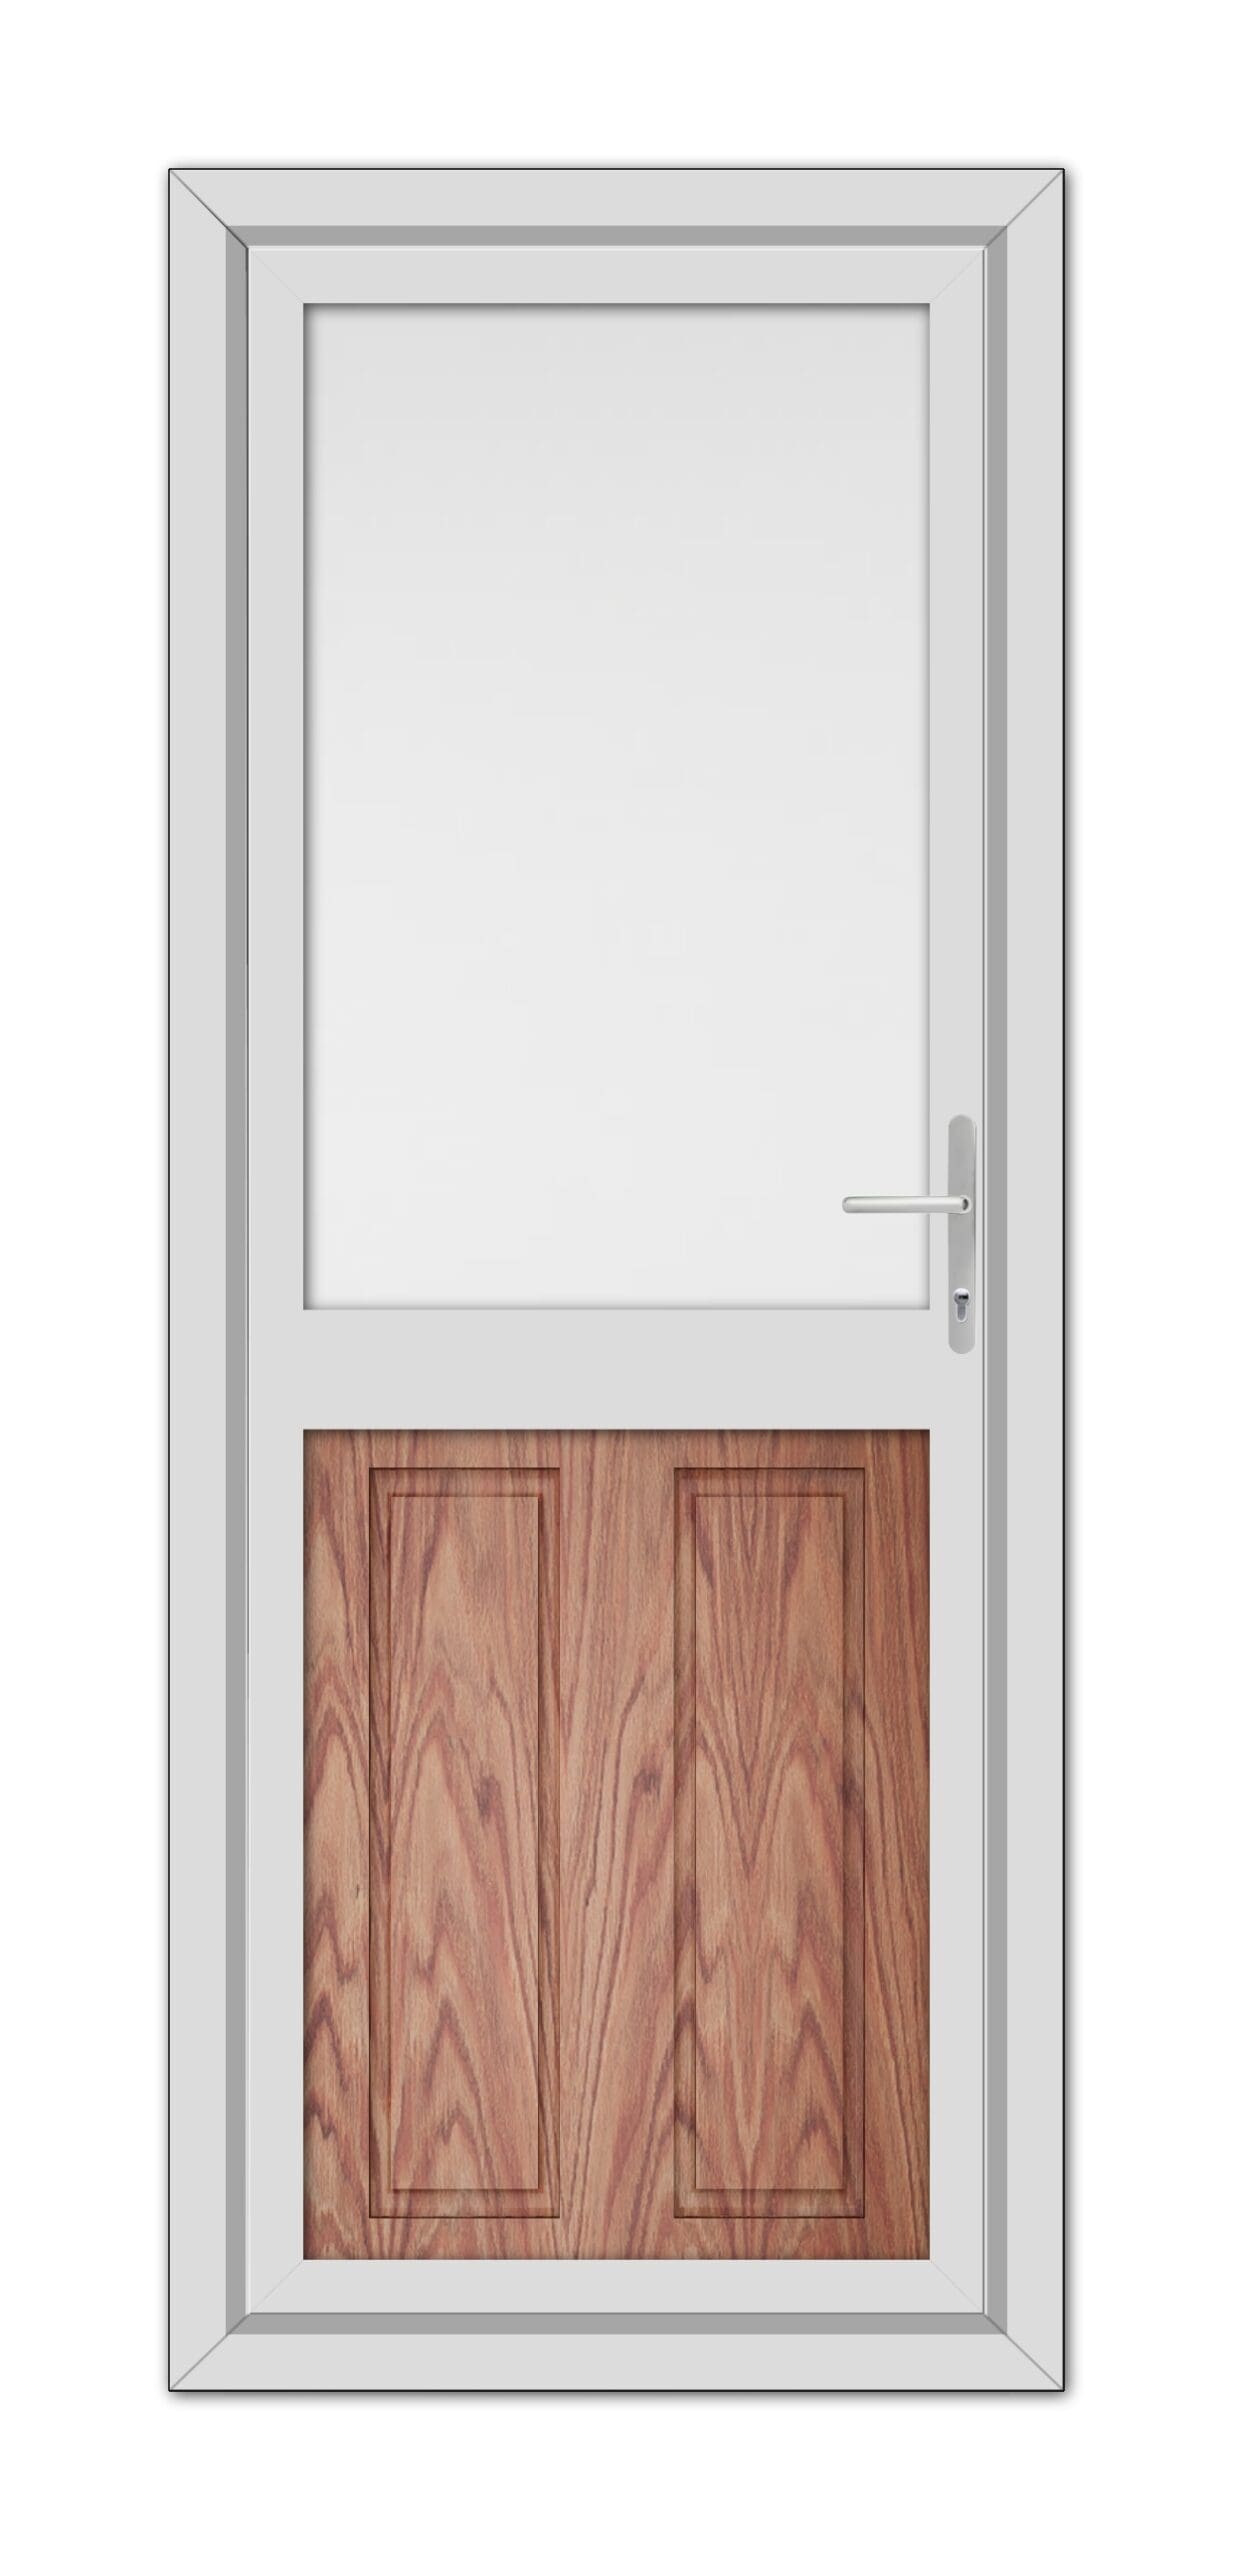 A modern Solid Oak Manor Half uPVC Back Door with a white frame, featuring a lower section with a wooden panel and equipped with a silver handle.